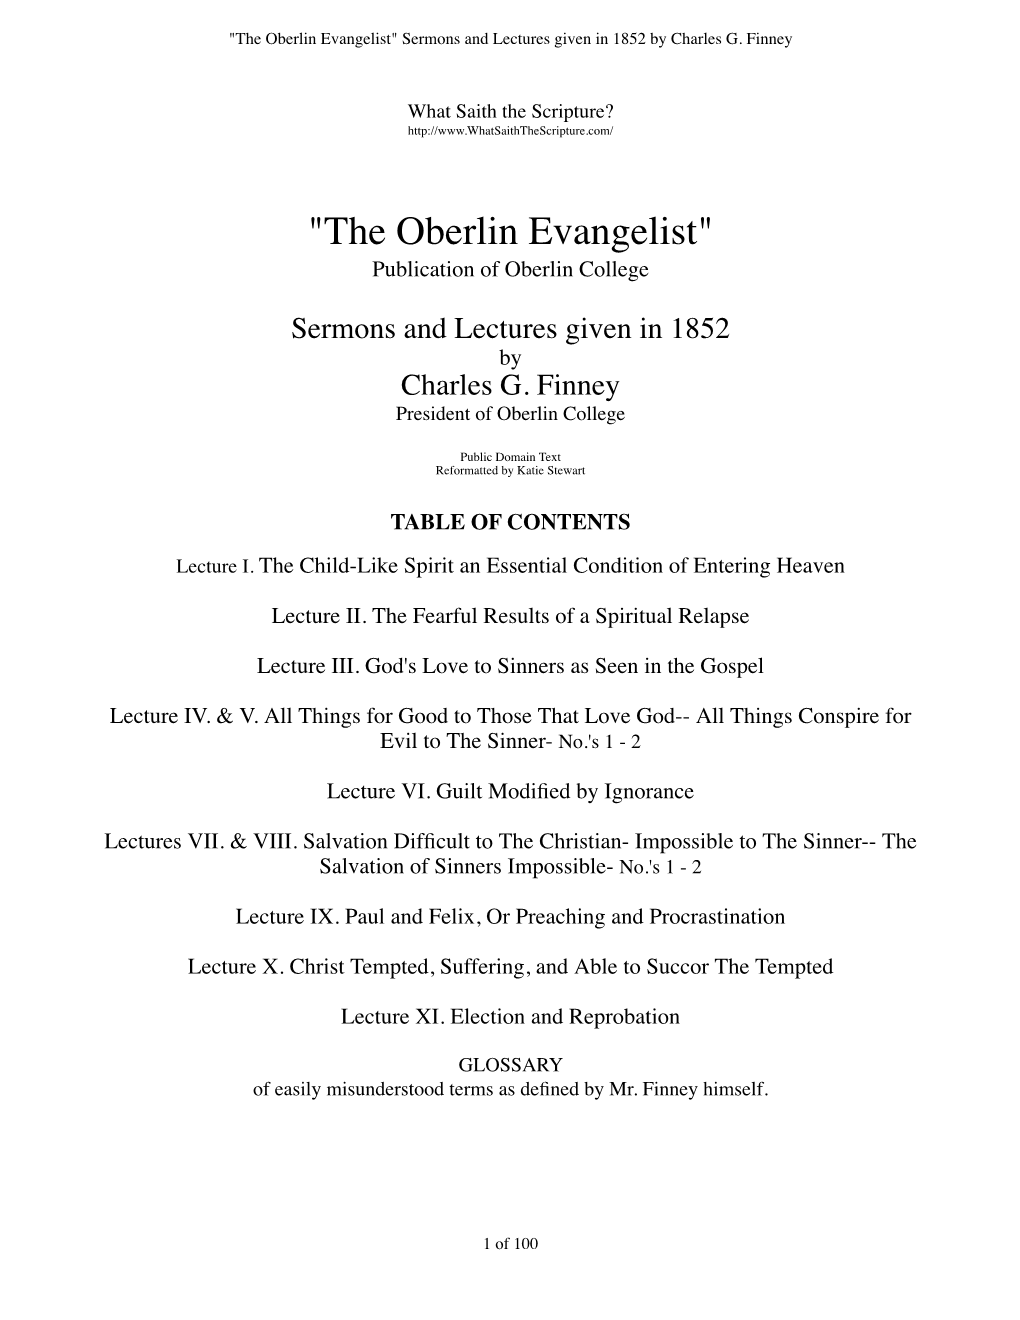 "The Oberlin Evangelist" Sermons and Lectures Given in 1852 by Charles G